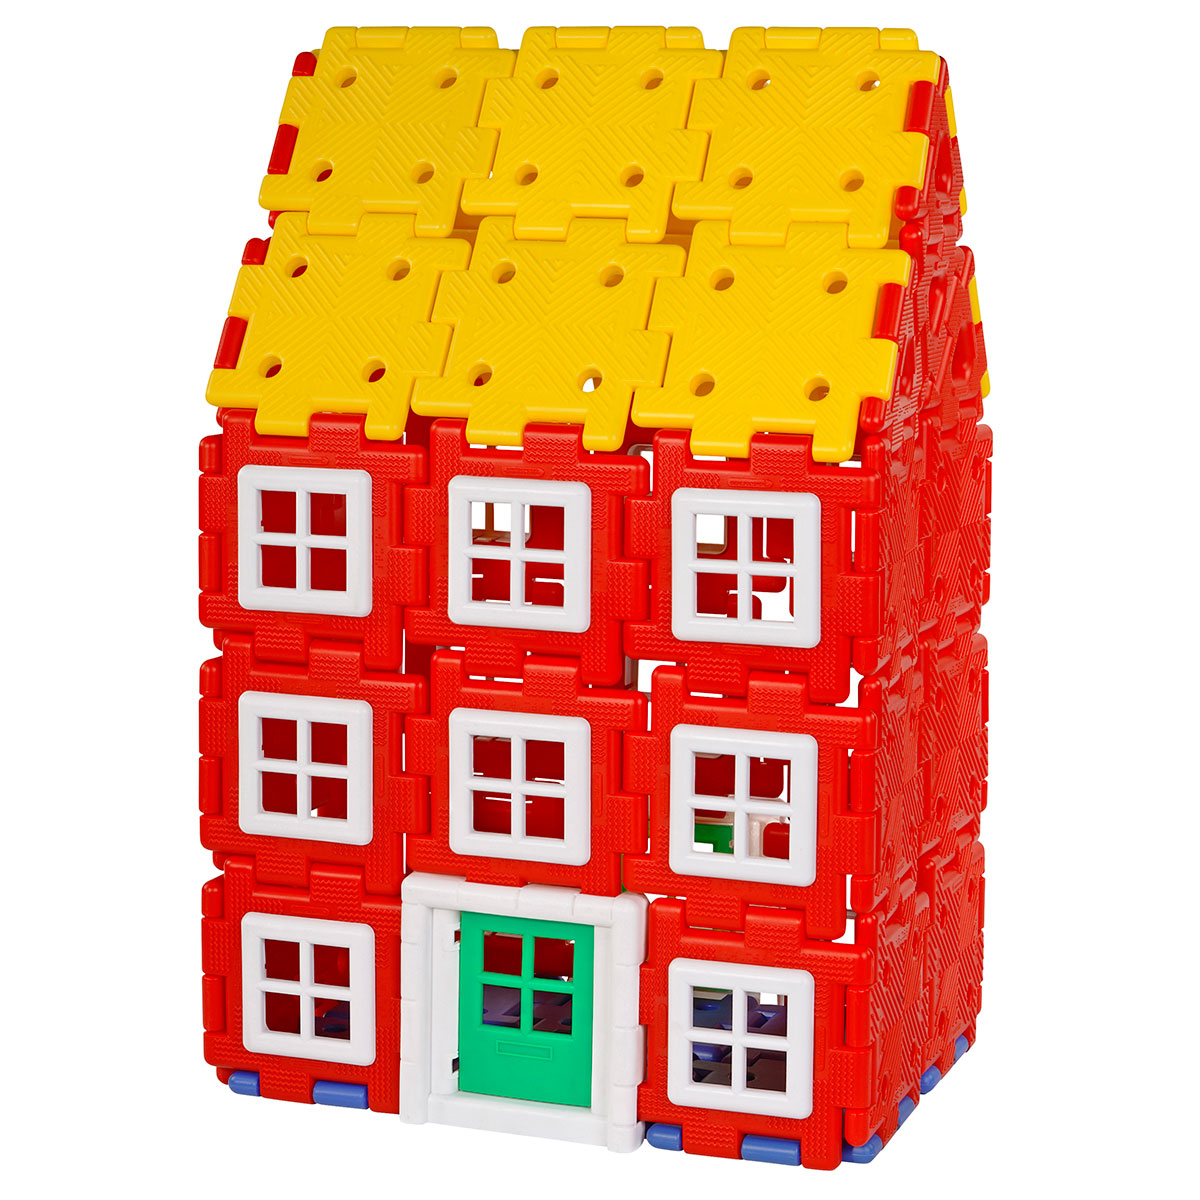 Giant Polydron House Builder, Budding young builders and architects will love to construct their own buildings with this attractive set. Giant Polydron House Builder contains enough pieces to build a house, a skyscraper, a church or any design from within a child's imagination. Children will not just love building their house but will also have fun looking through the windows at each other and they will learn about shape and space whilst they play. The Giant Polydron House Builder set is suitable for both i